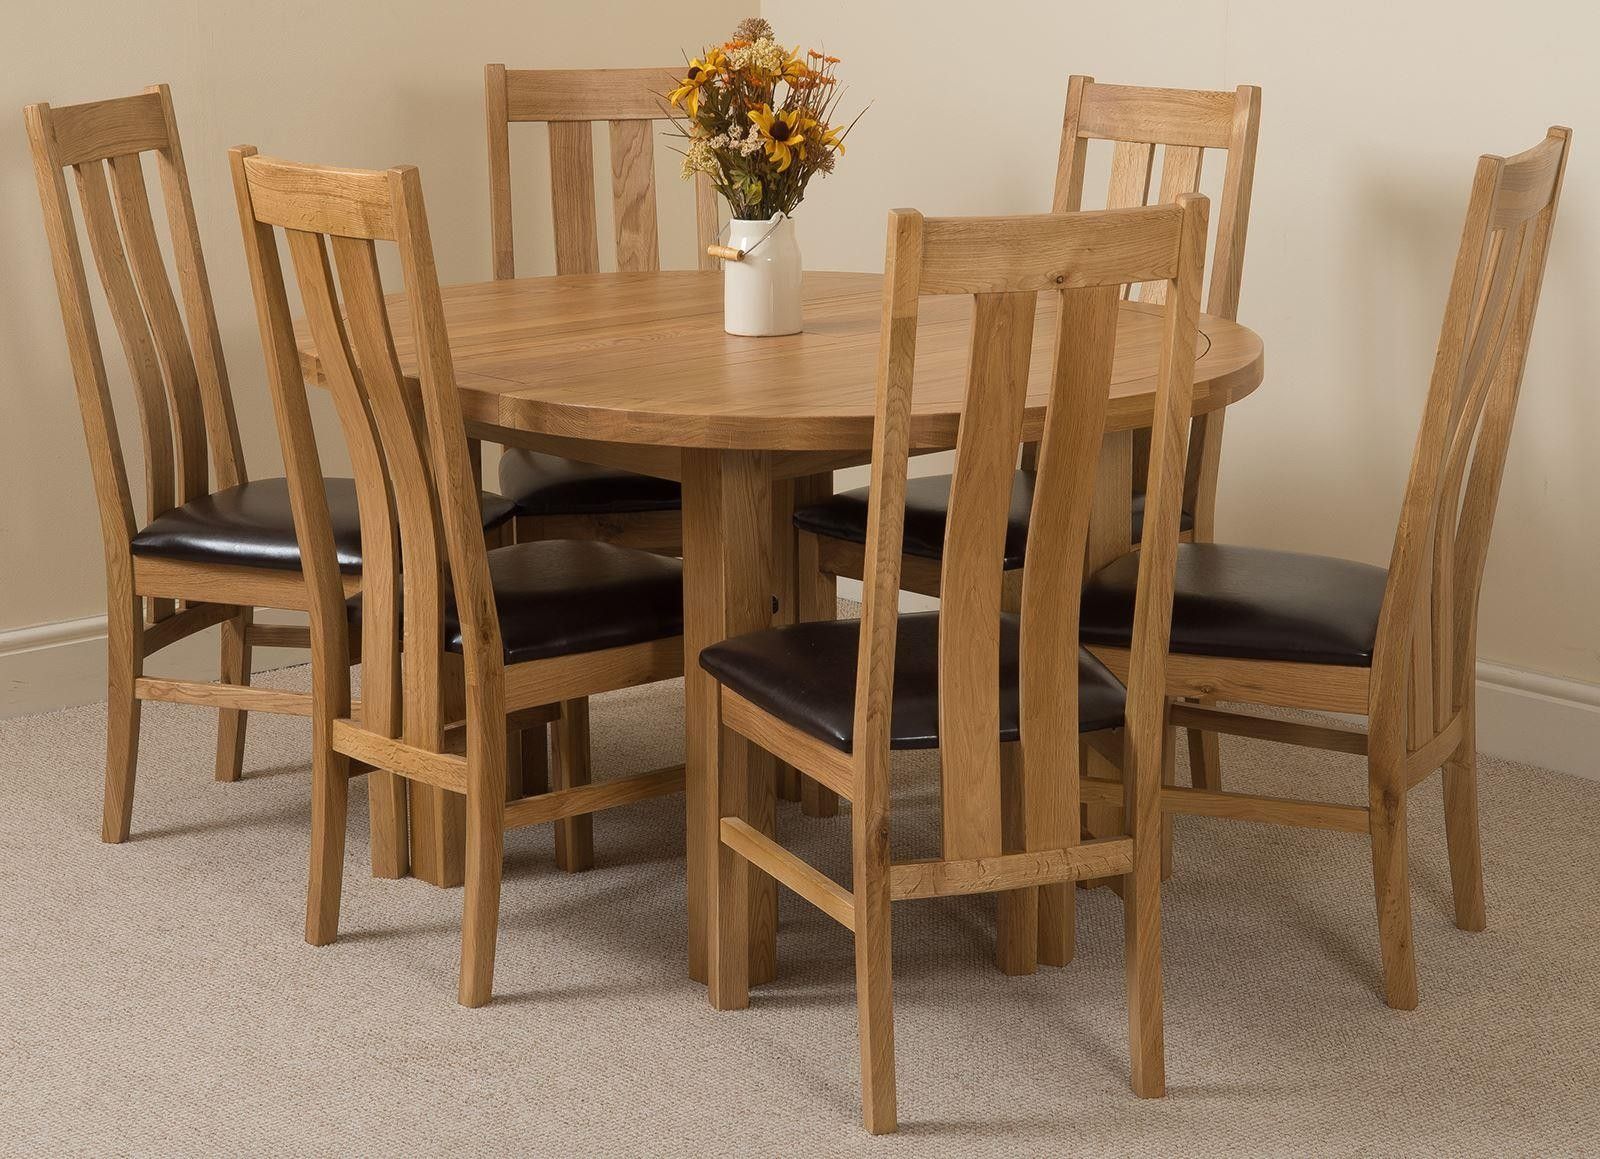 Edmonton Solid Oak Extending Oval Dining Table With 6 Princeton Solid With Regard To Extendable Oval Dining Sets (View 5 of 15)